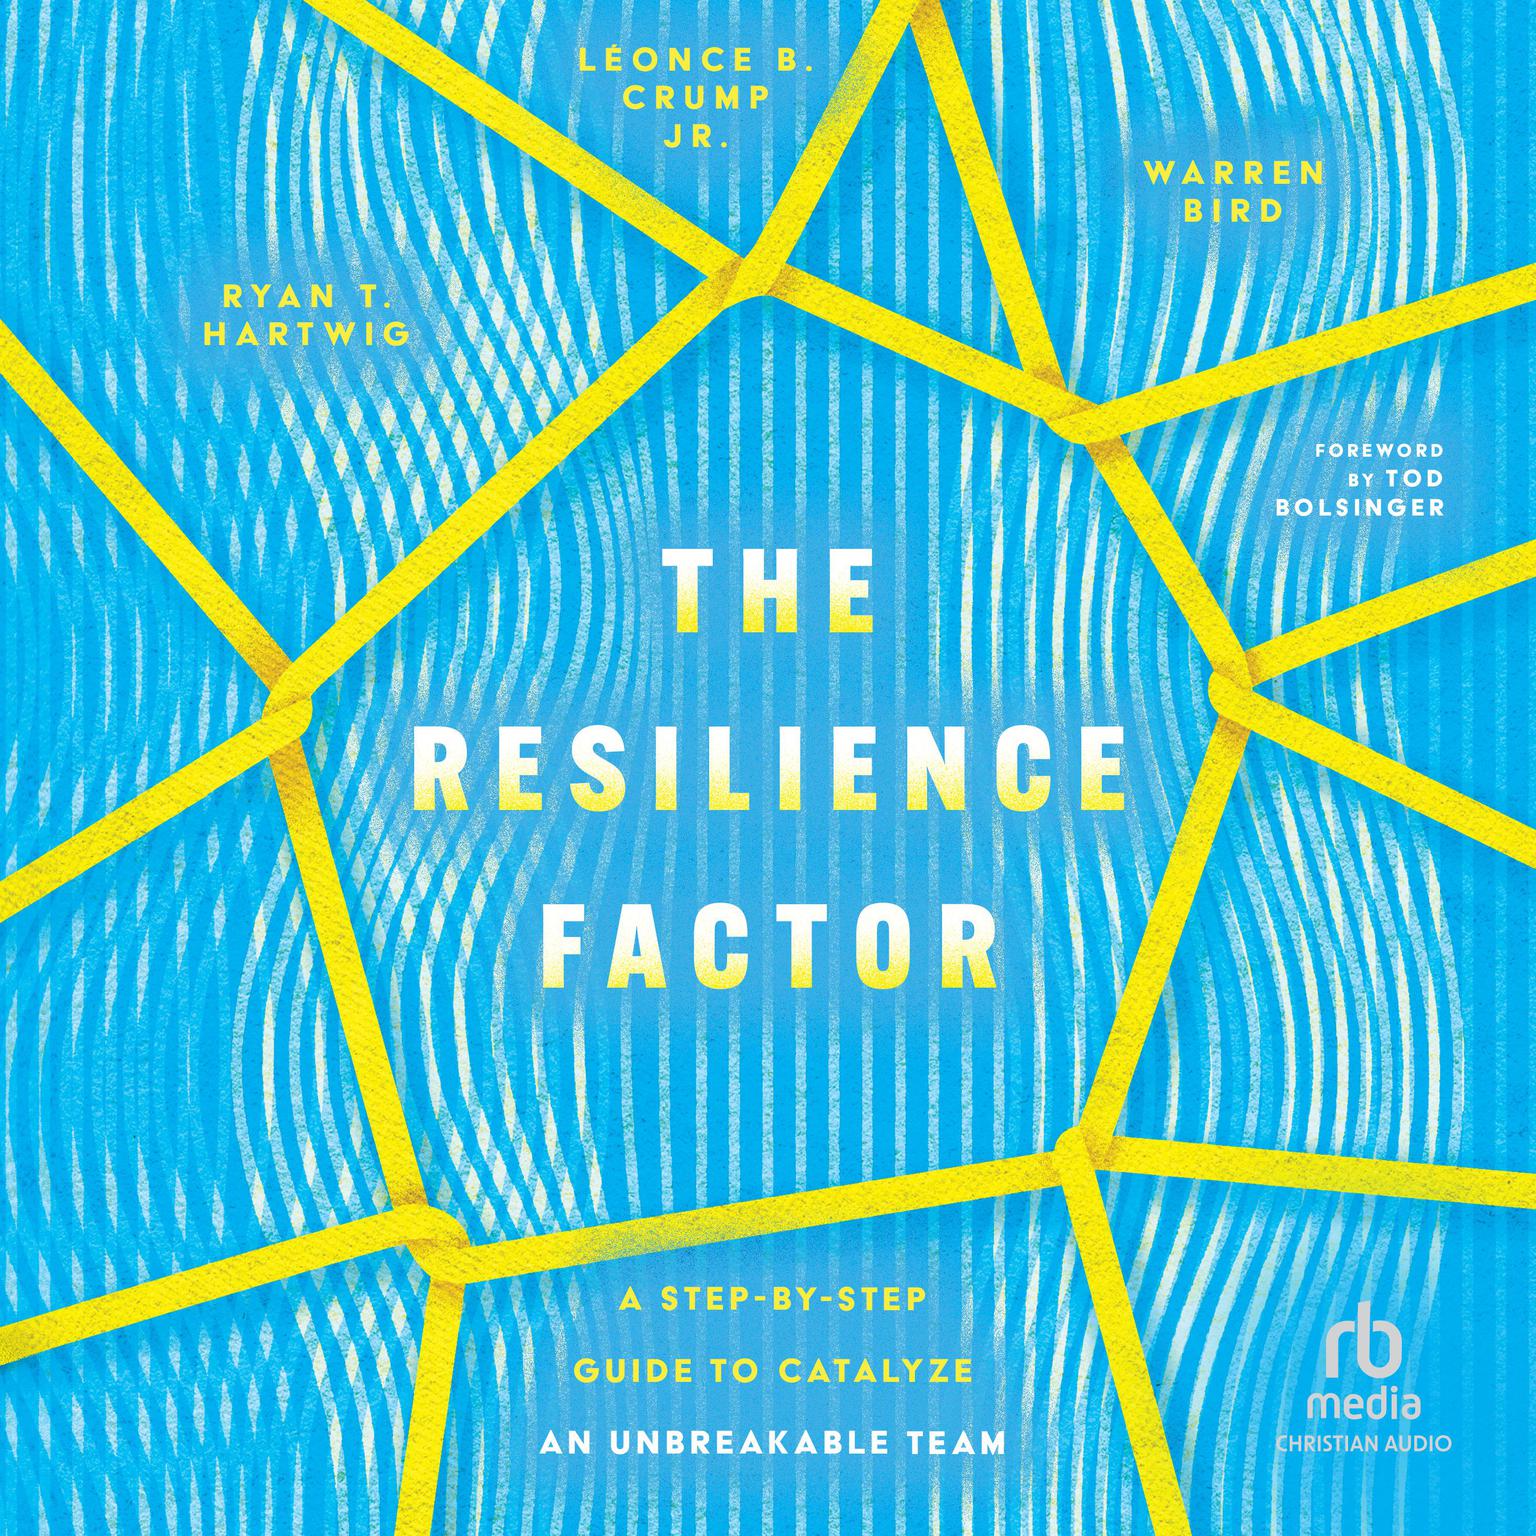 The Resilience Factor: A Step-by-Step Guide to Catalyze an Unbreakable Team Audiobook, by Ryan T. Hartwig